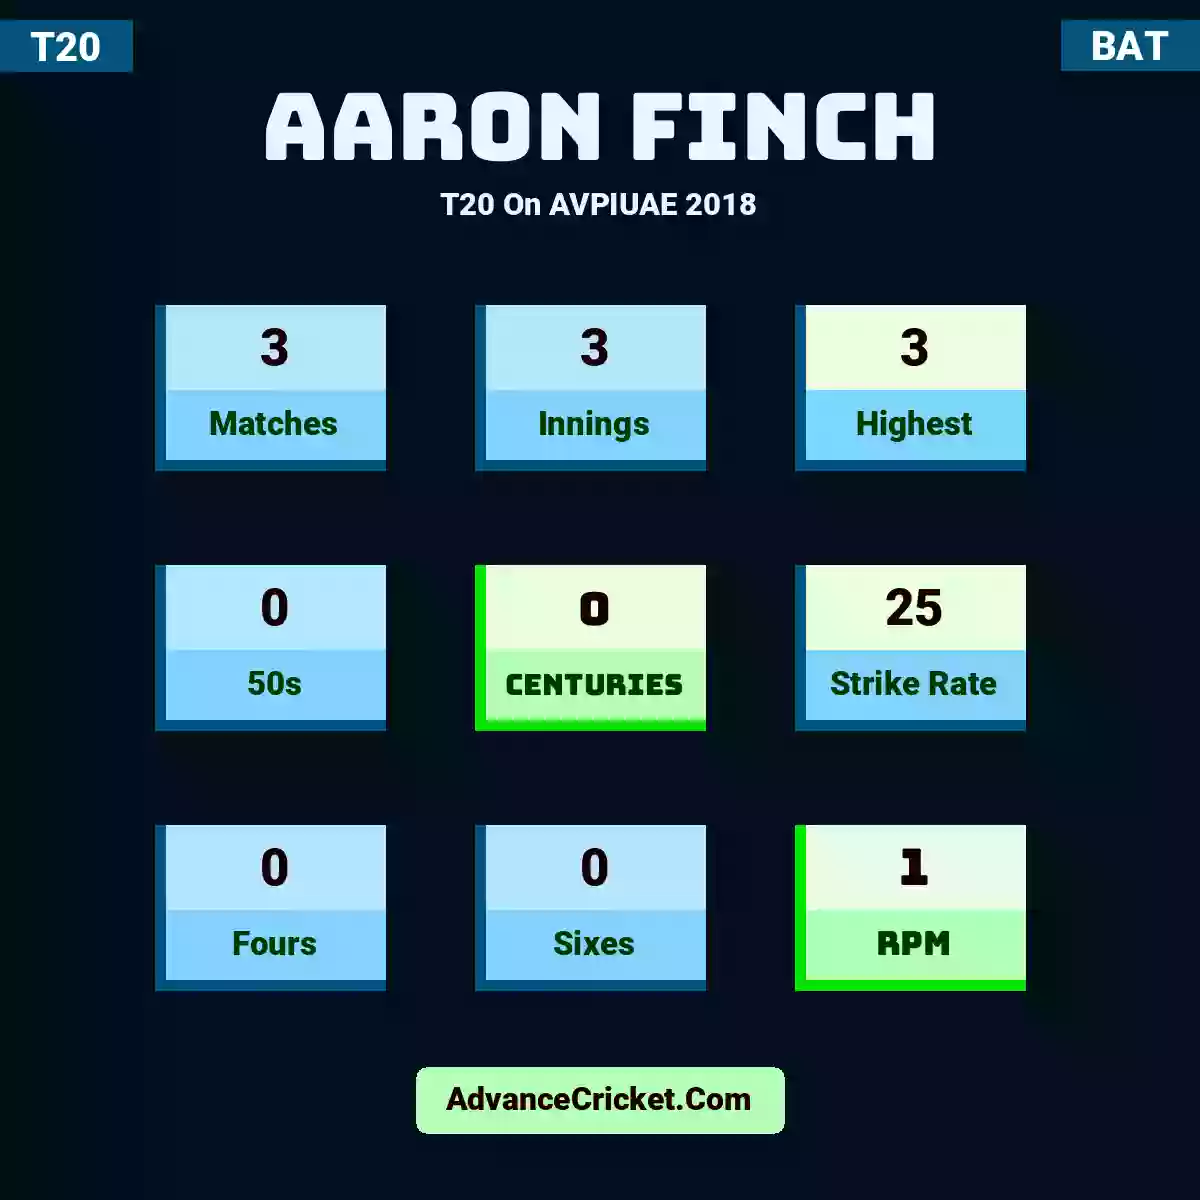 Aaron Finch T20  On AVPIUAE 2018, Aaron Finch played 3 matches, scored 3 runs as highest, 0 half-centuries, and 0 centuries, with a strike rate of 25. A.Finch hit 0 fours and 0 sixes, with an RPM of 1.